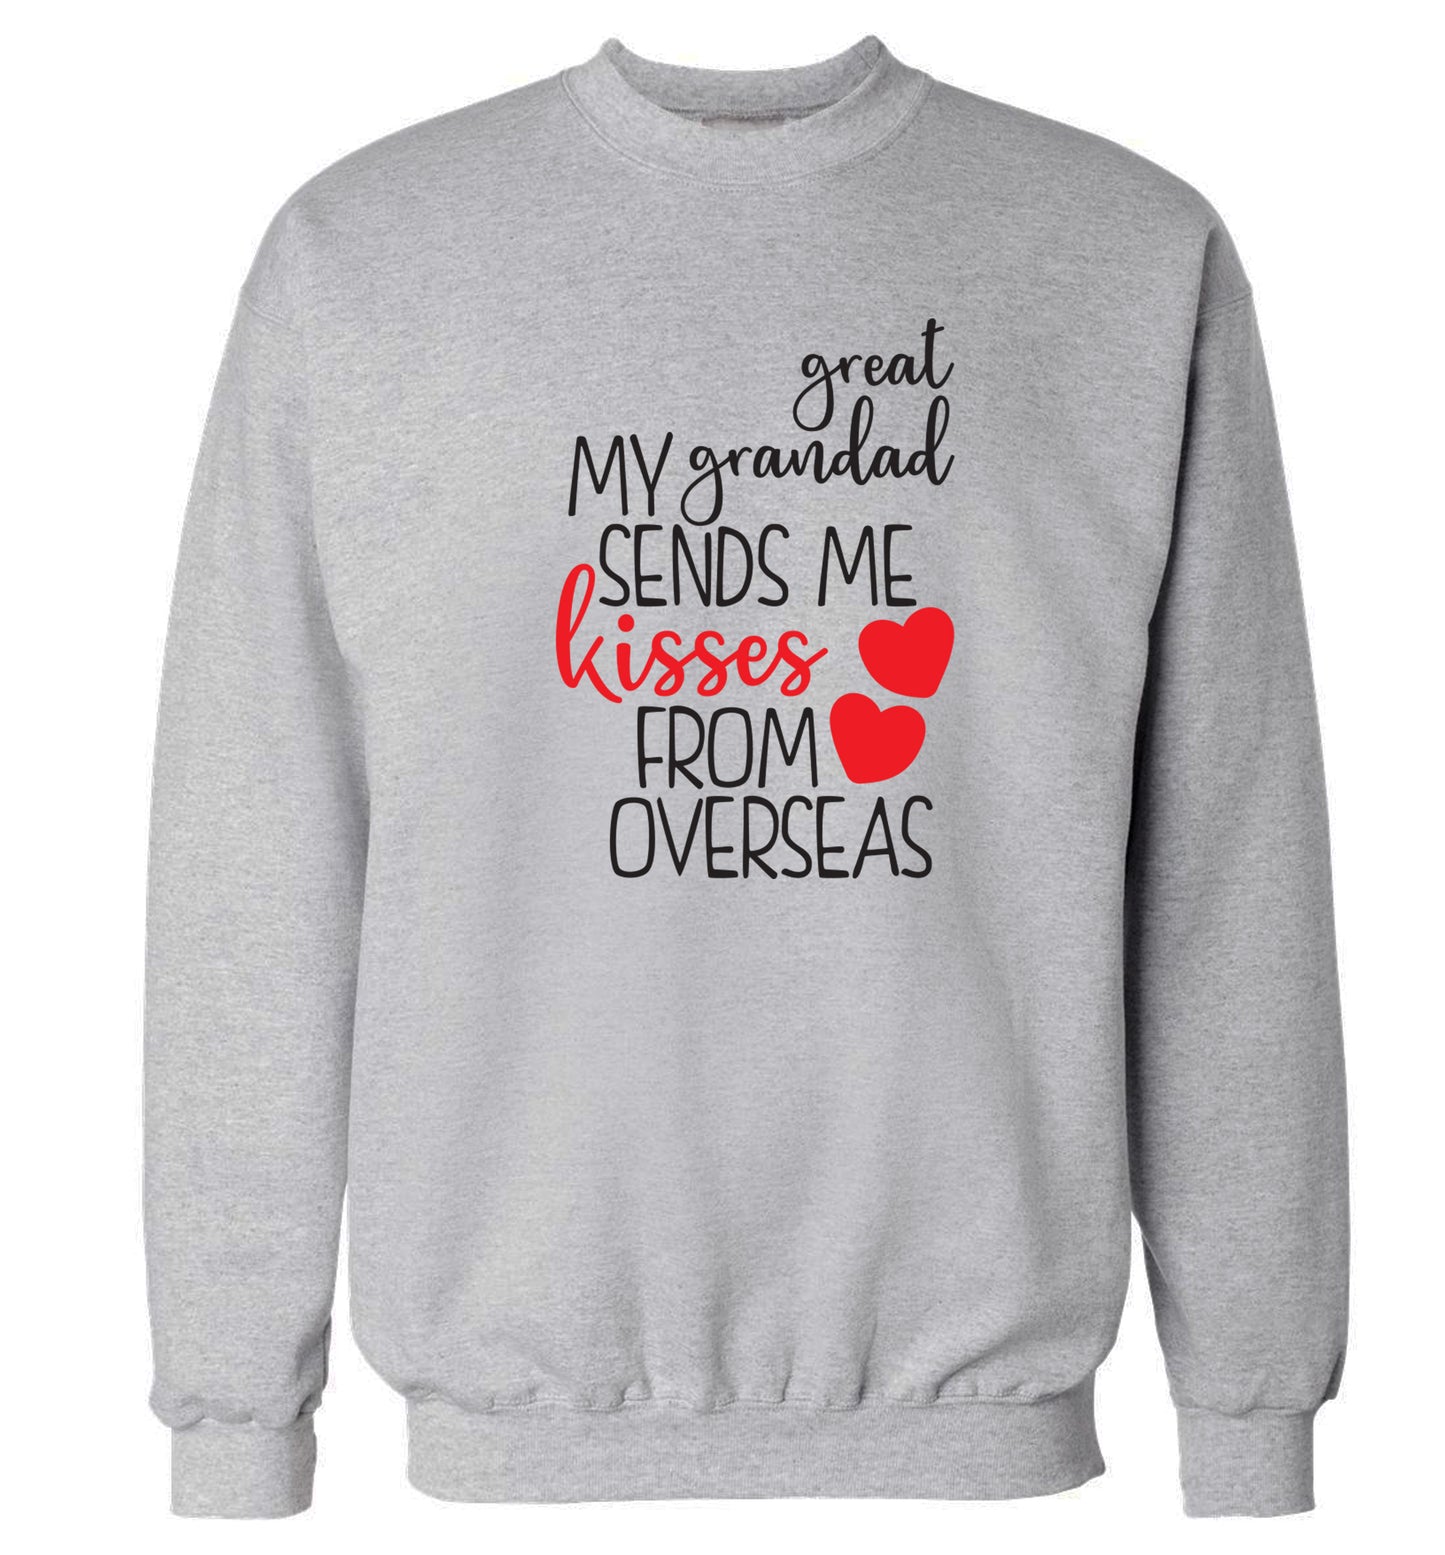 My great grandad sends me kisses from overseas Adult's unisex grey Sweater 2XL